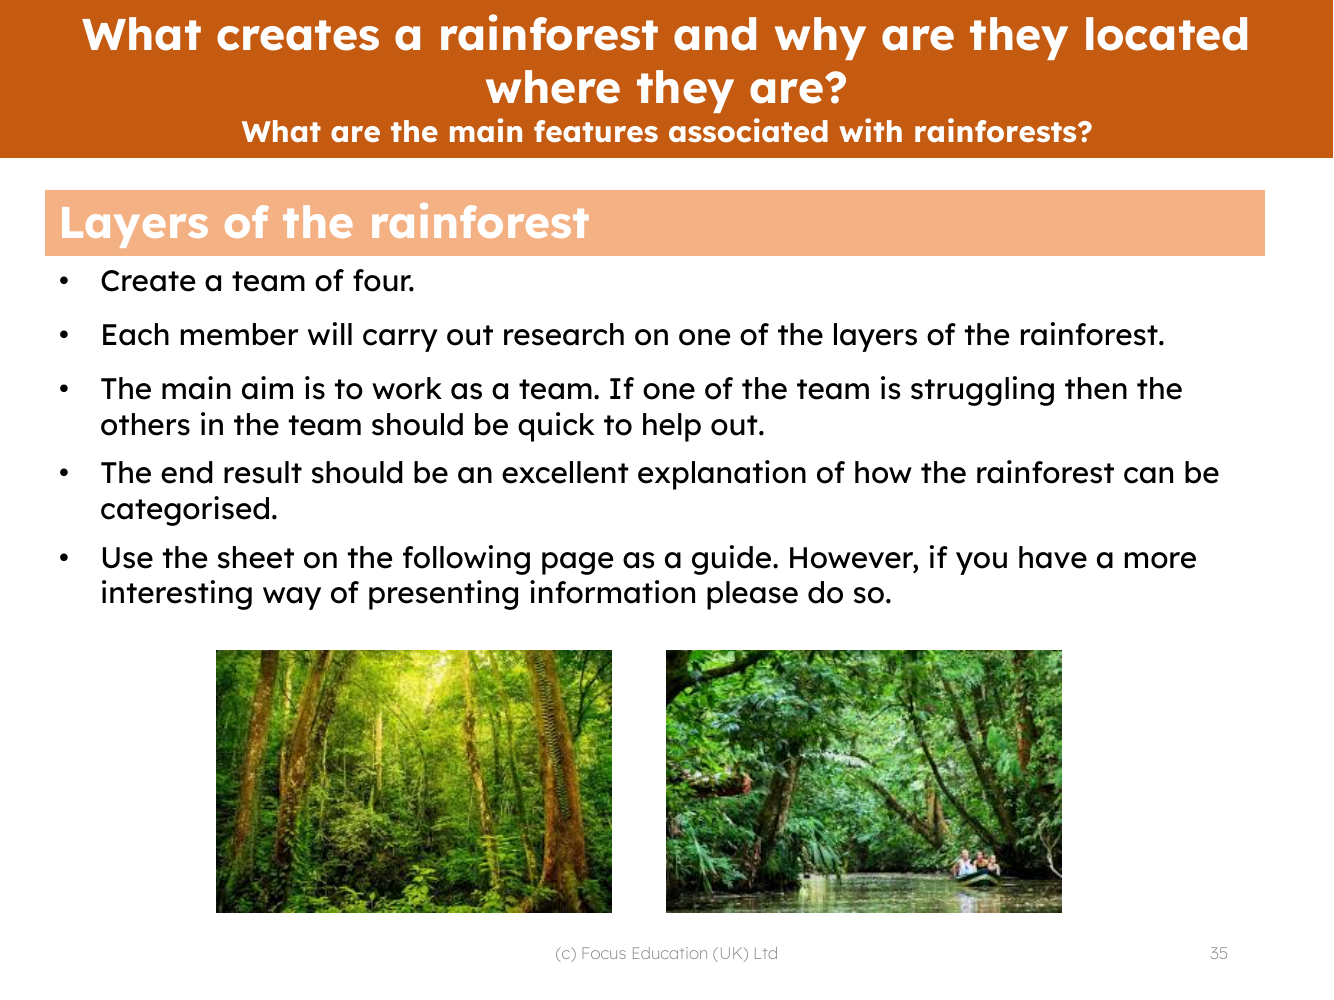 Layers of the rainforest - Research task